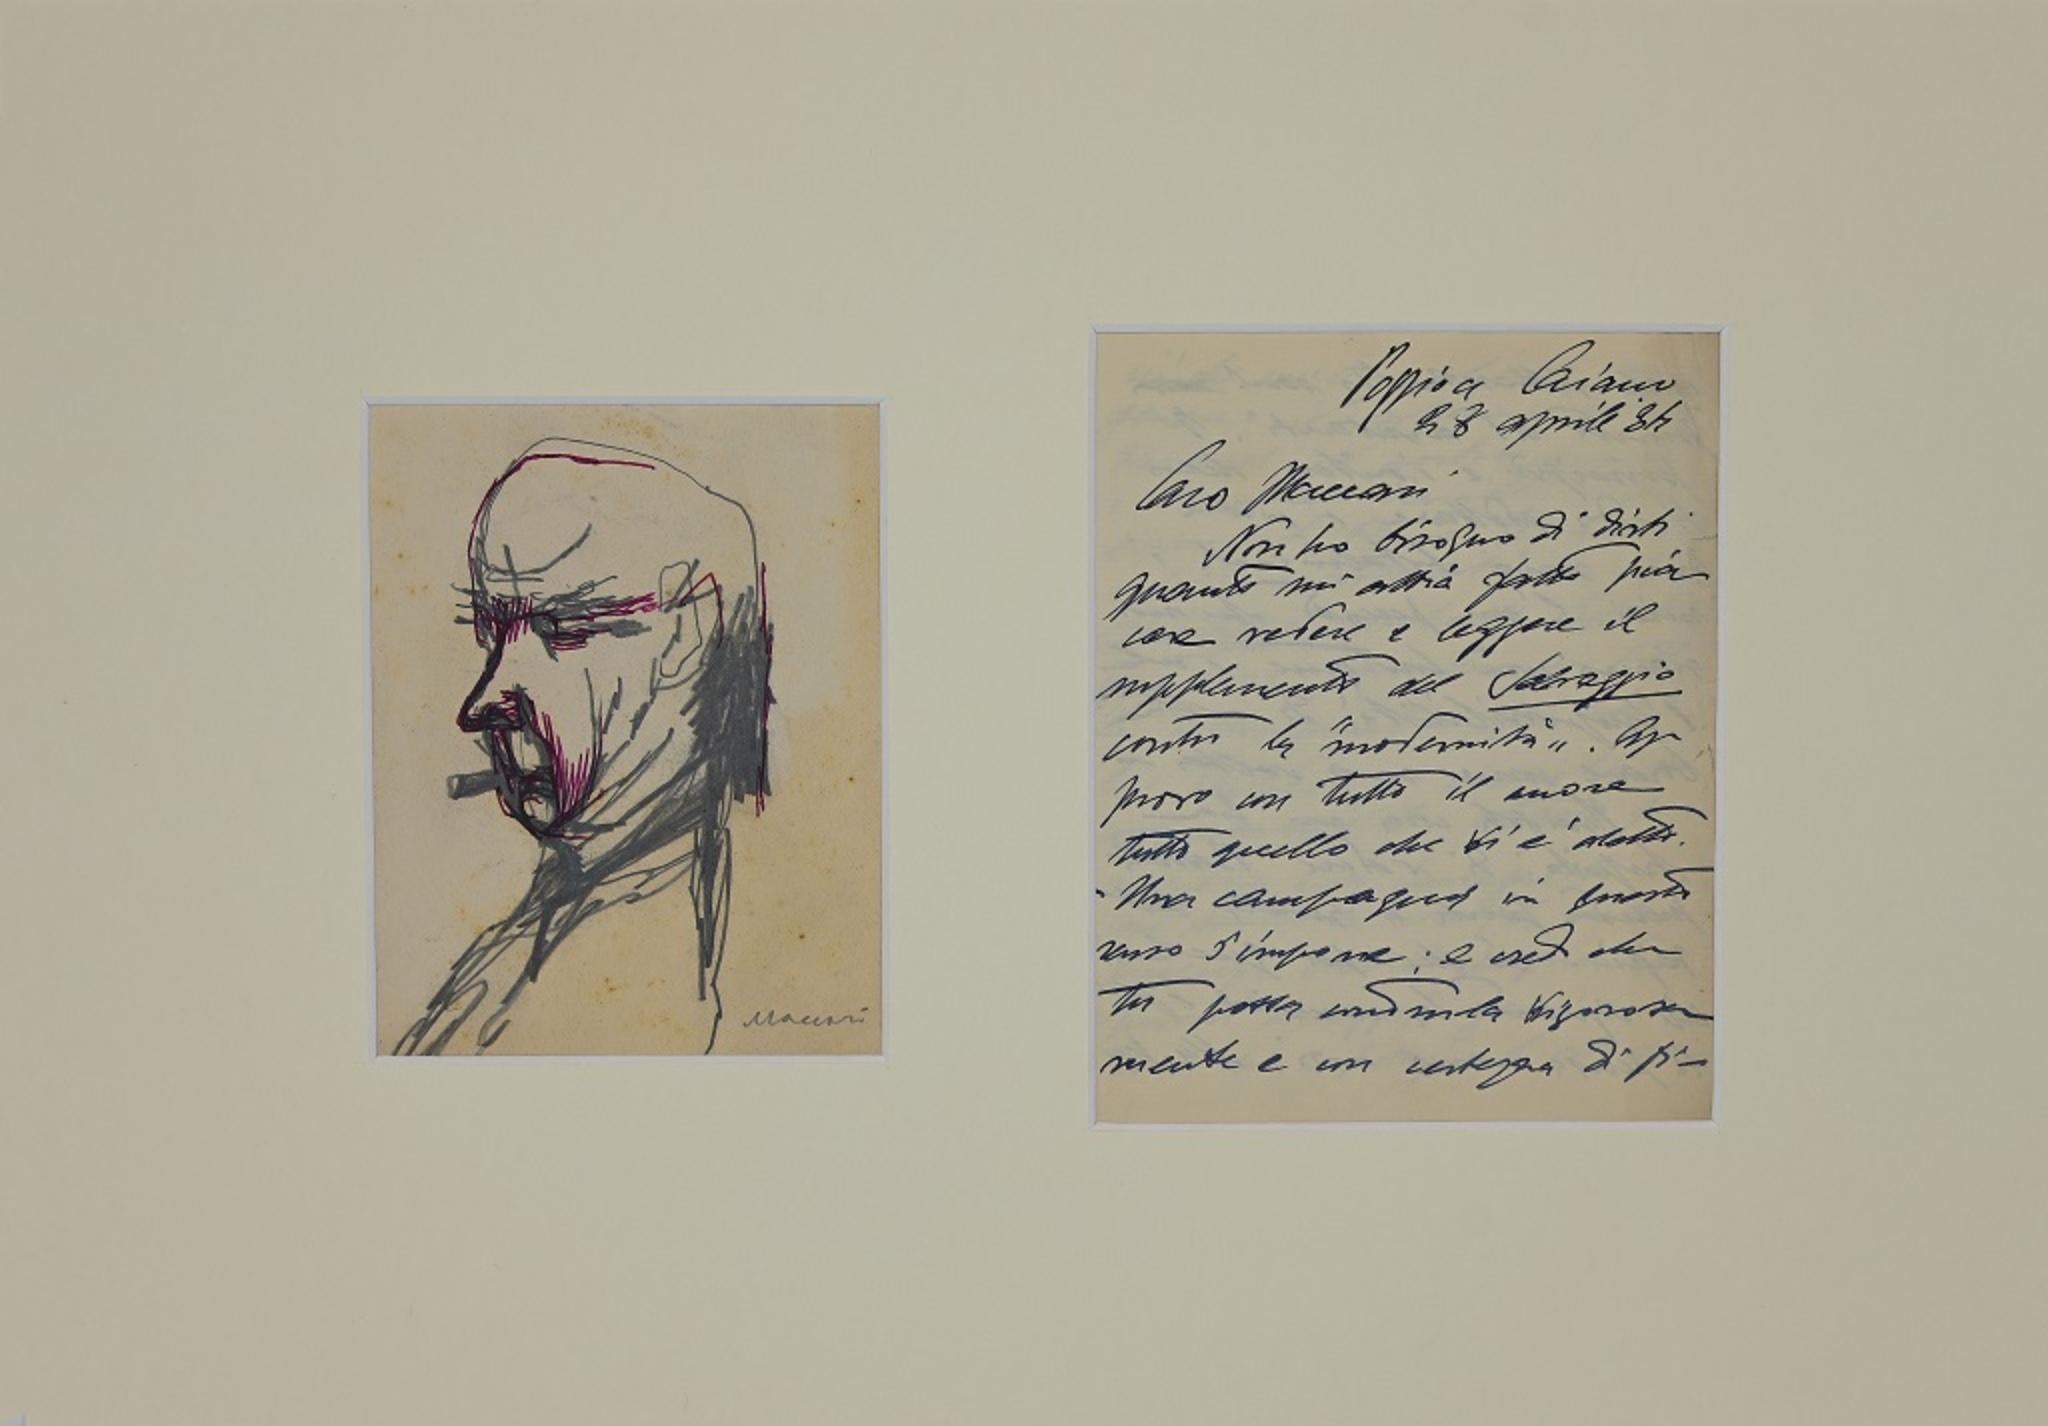 This unique set includes a manuscript letter written by Ardengo Soffici to the artist Mino Maccari and his portrait realized by the same Maccari.

Autograph Letter Signed. Aprile, 28th 1934. One page, single-sided.

The drawing shows little foxings